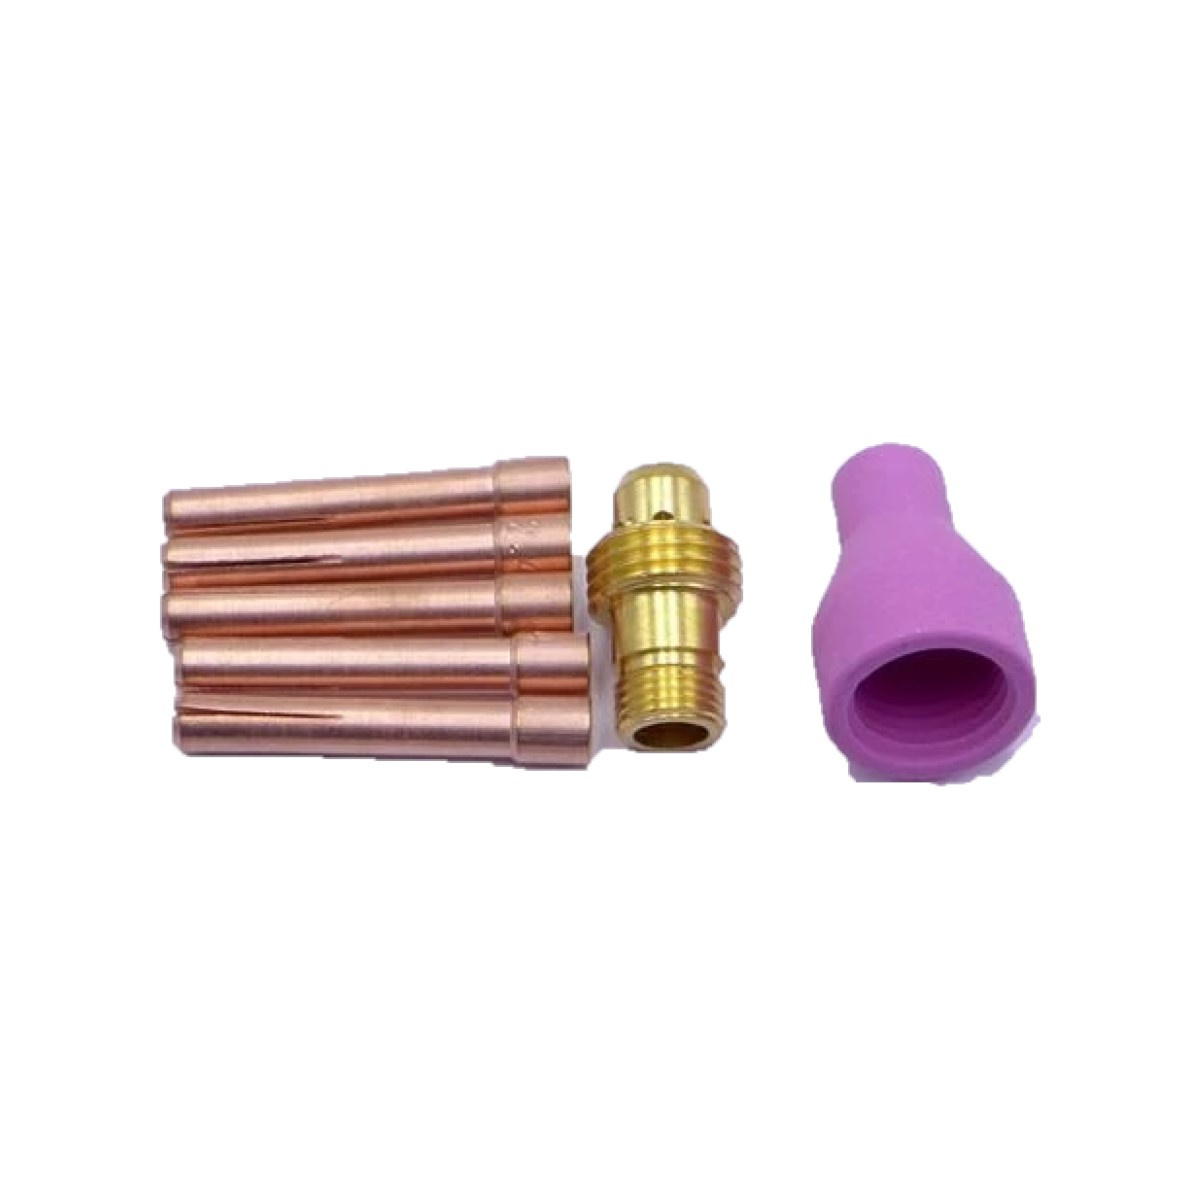 welding product - Tig QQ150/300 Torch Parts